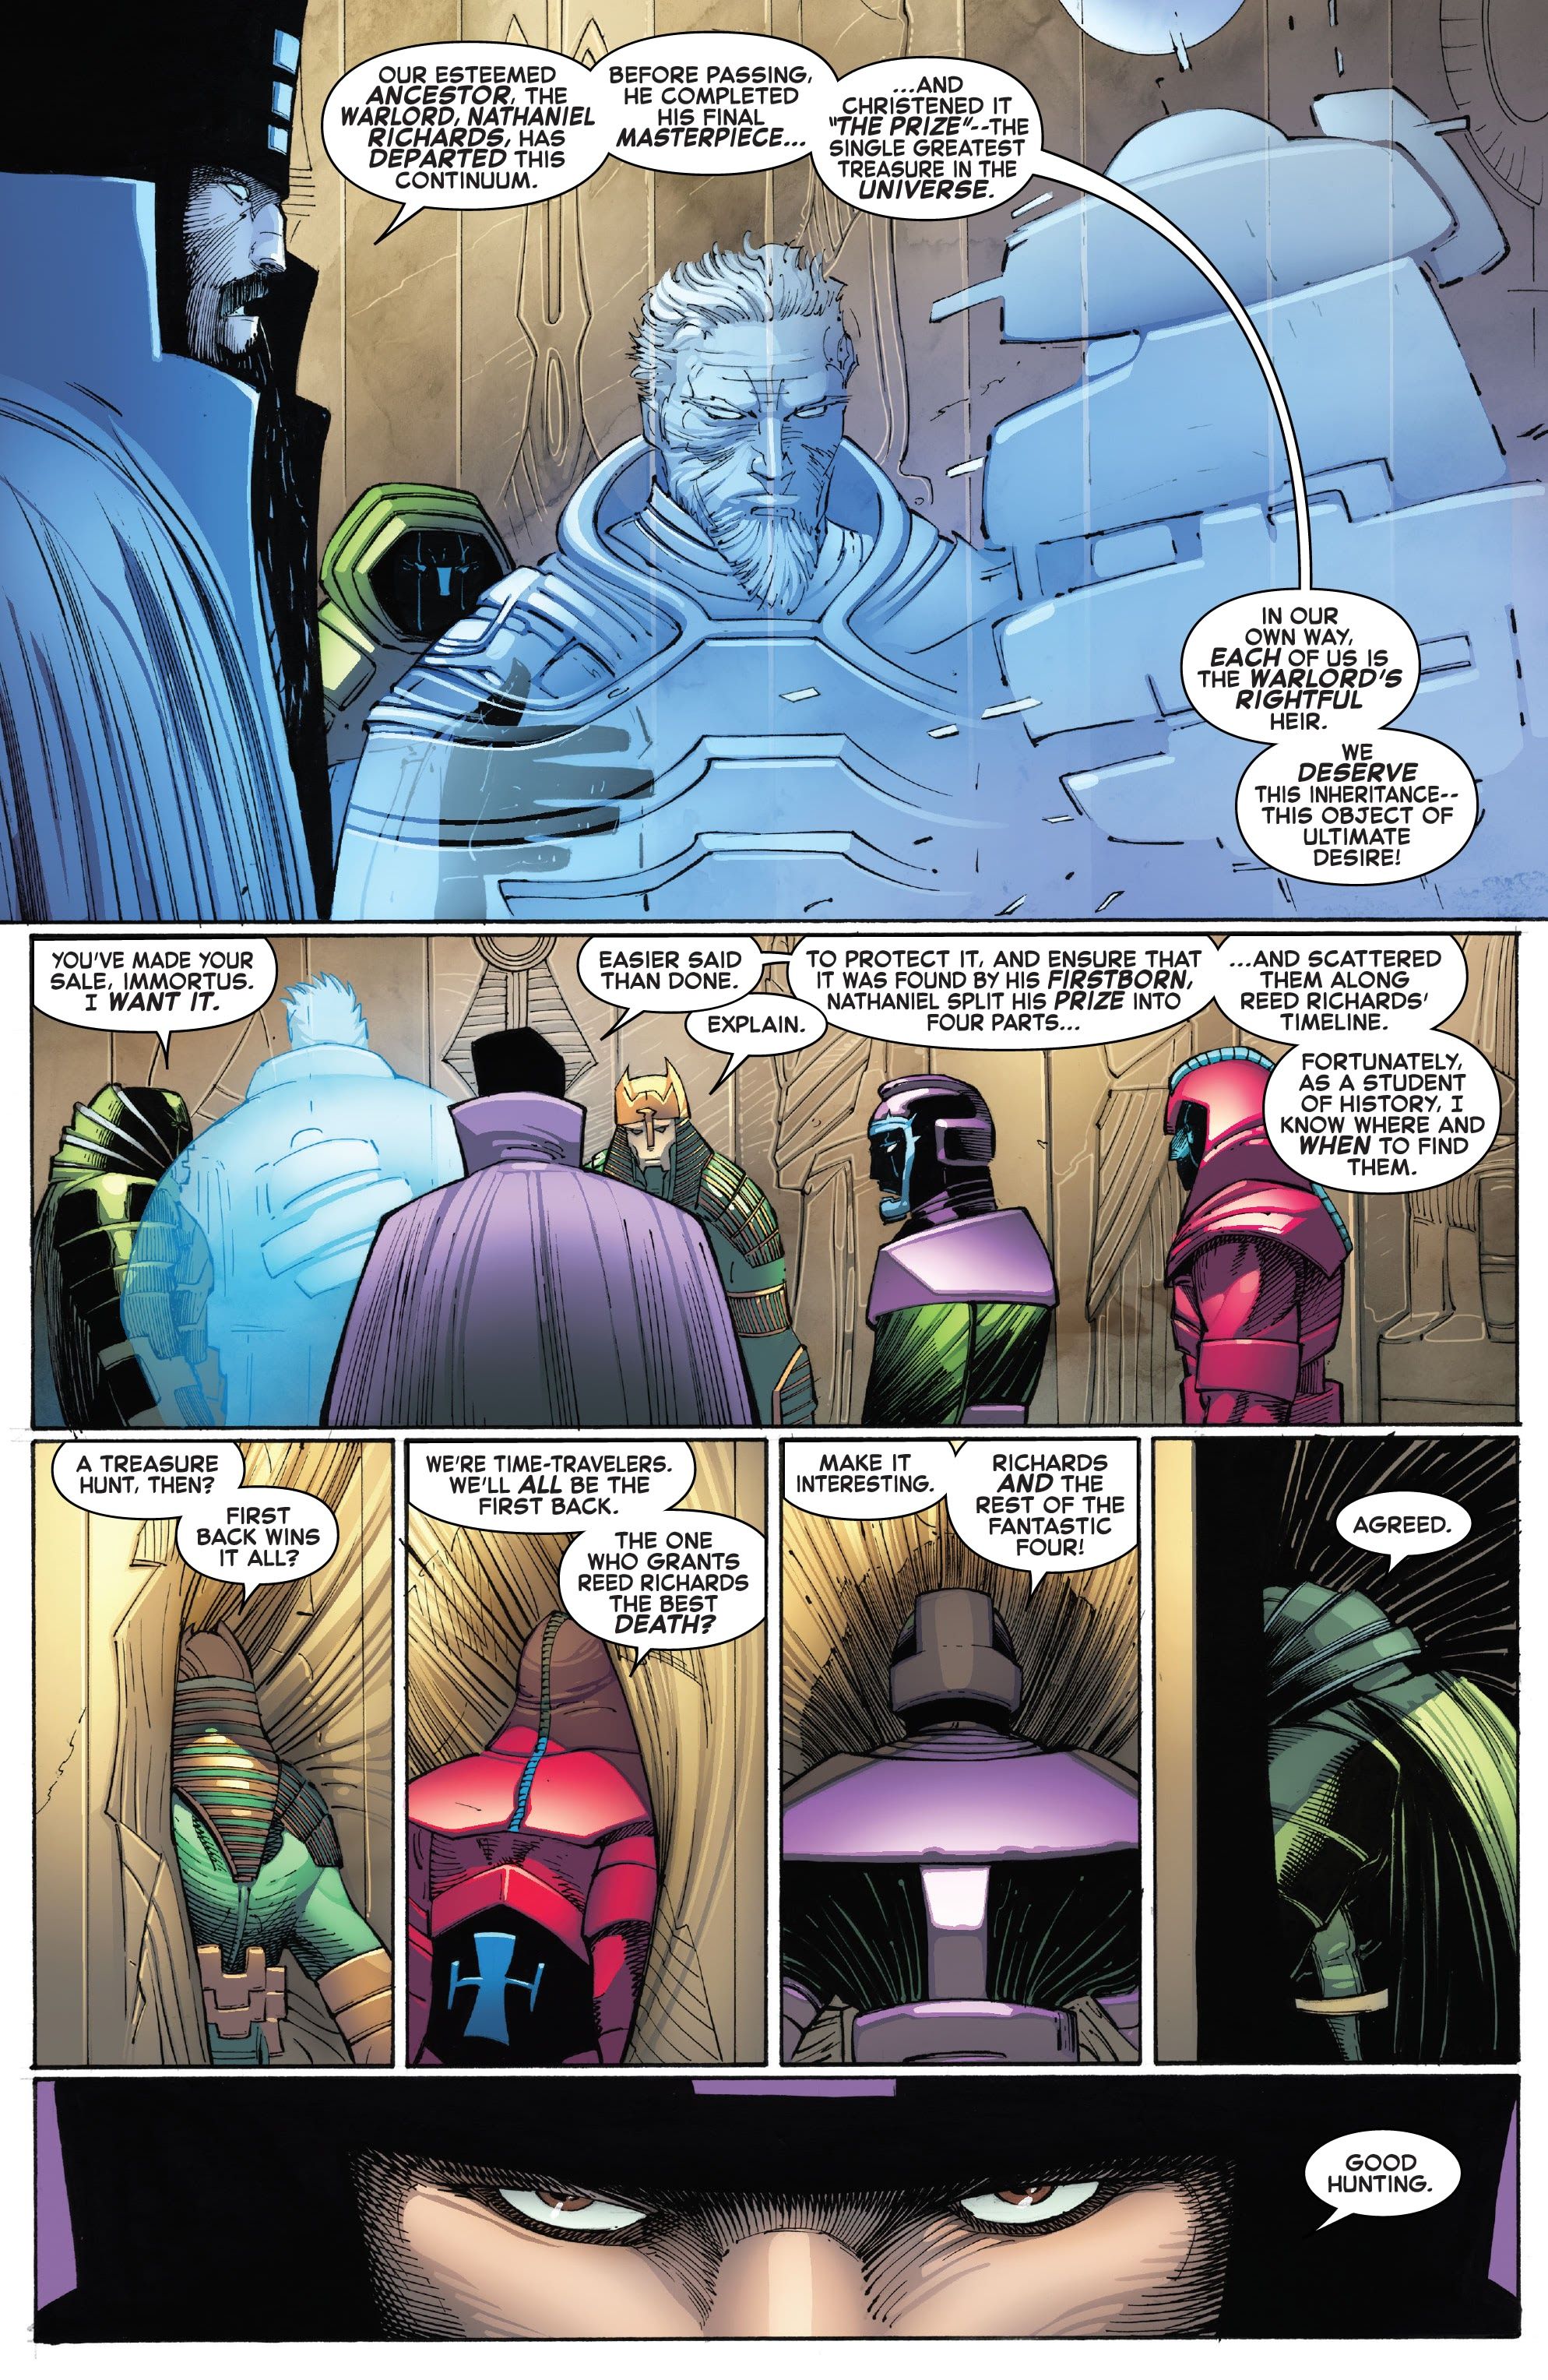 A group of Kang variants express their desire to find their ancestor's last invention